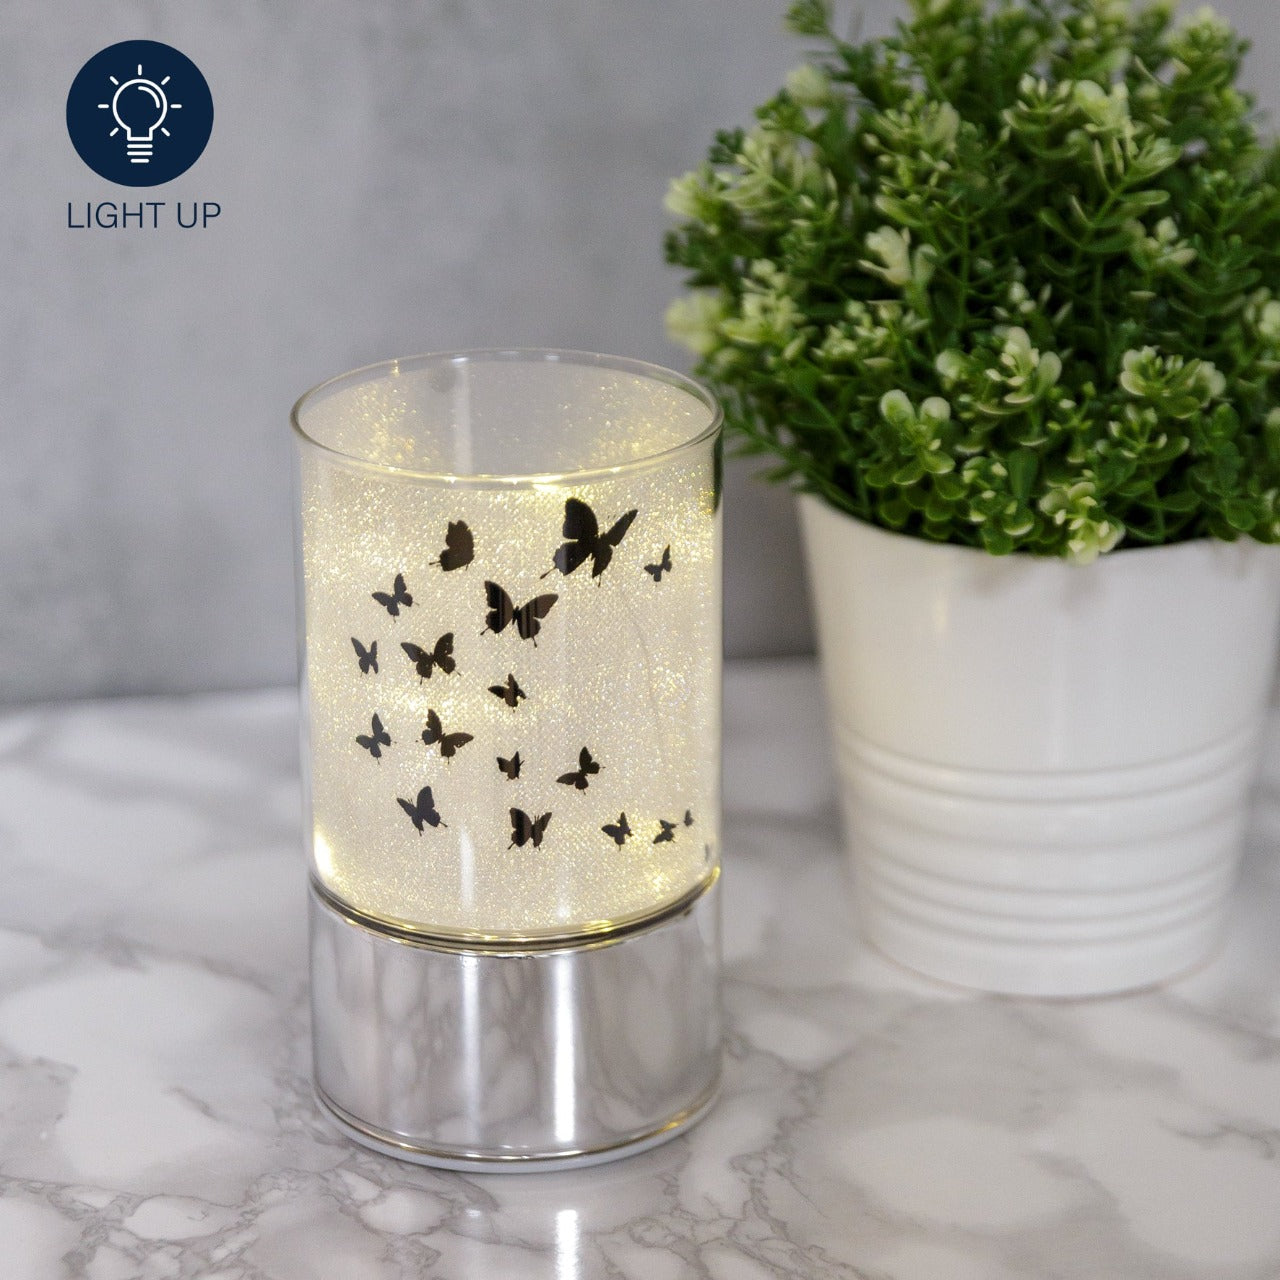 HESTIA® Glass Butterfly Design Tube with LED Lights 15cm  A beautiful LED tube from HESTIA®'s Silver Luxe collection. Featuring a dazzling glitter finish with butterfly design on a metal base. Requires 3 x AA batteries for use.